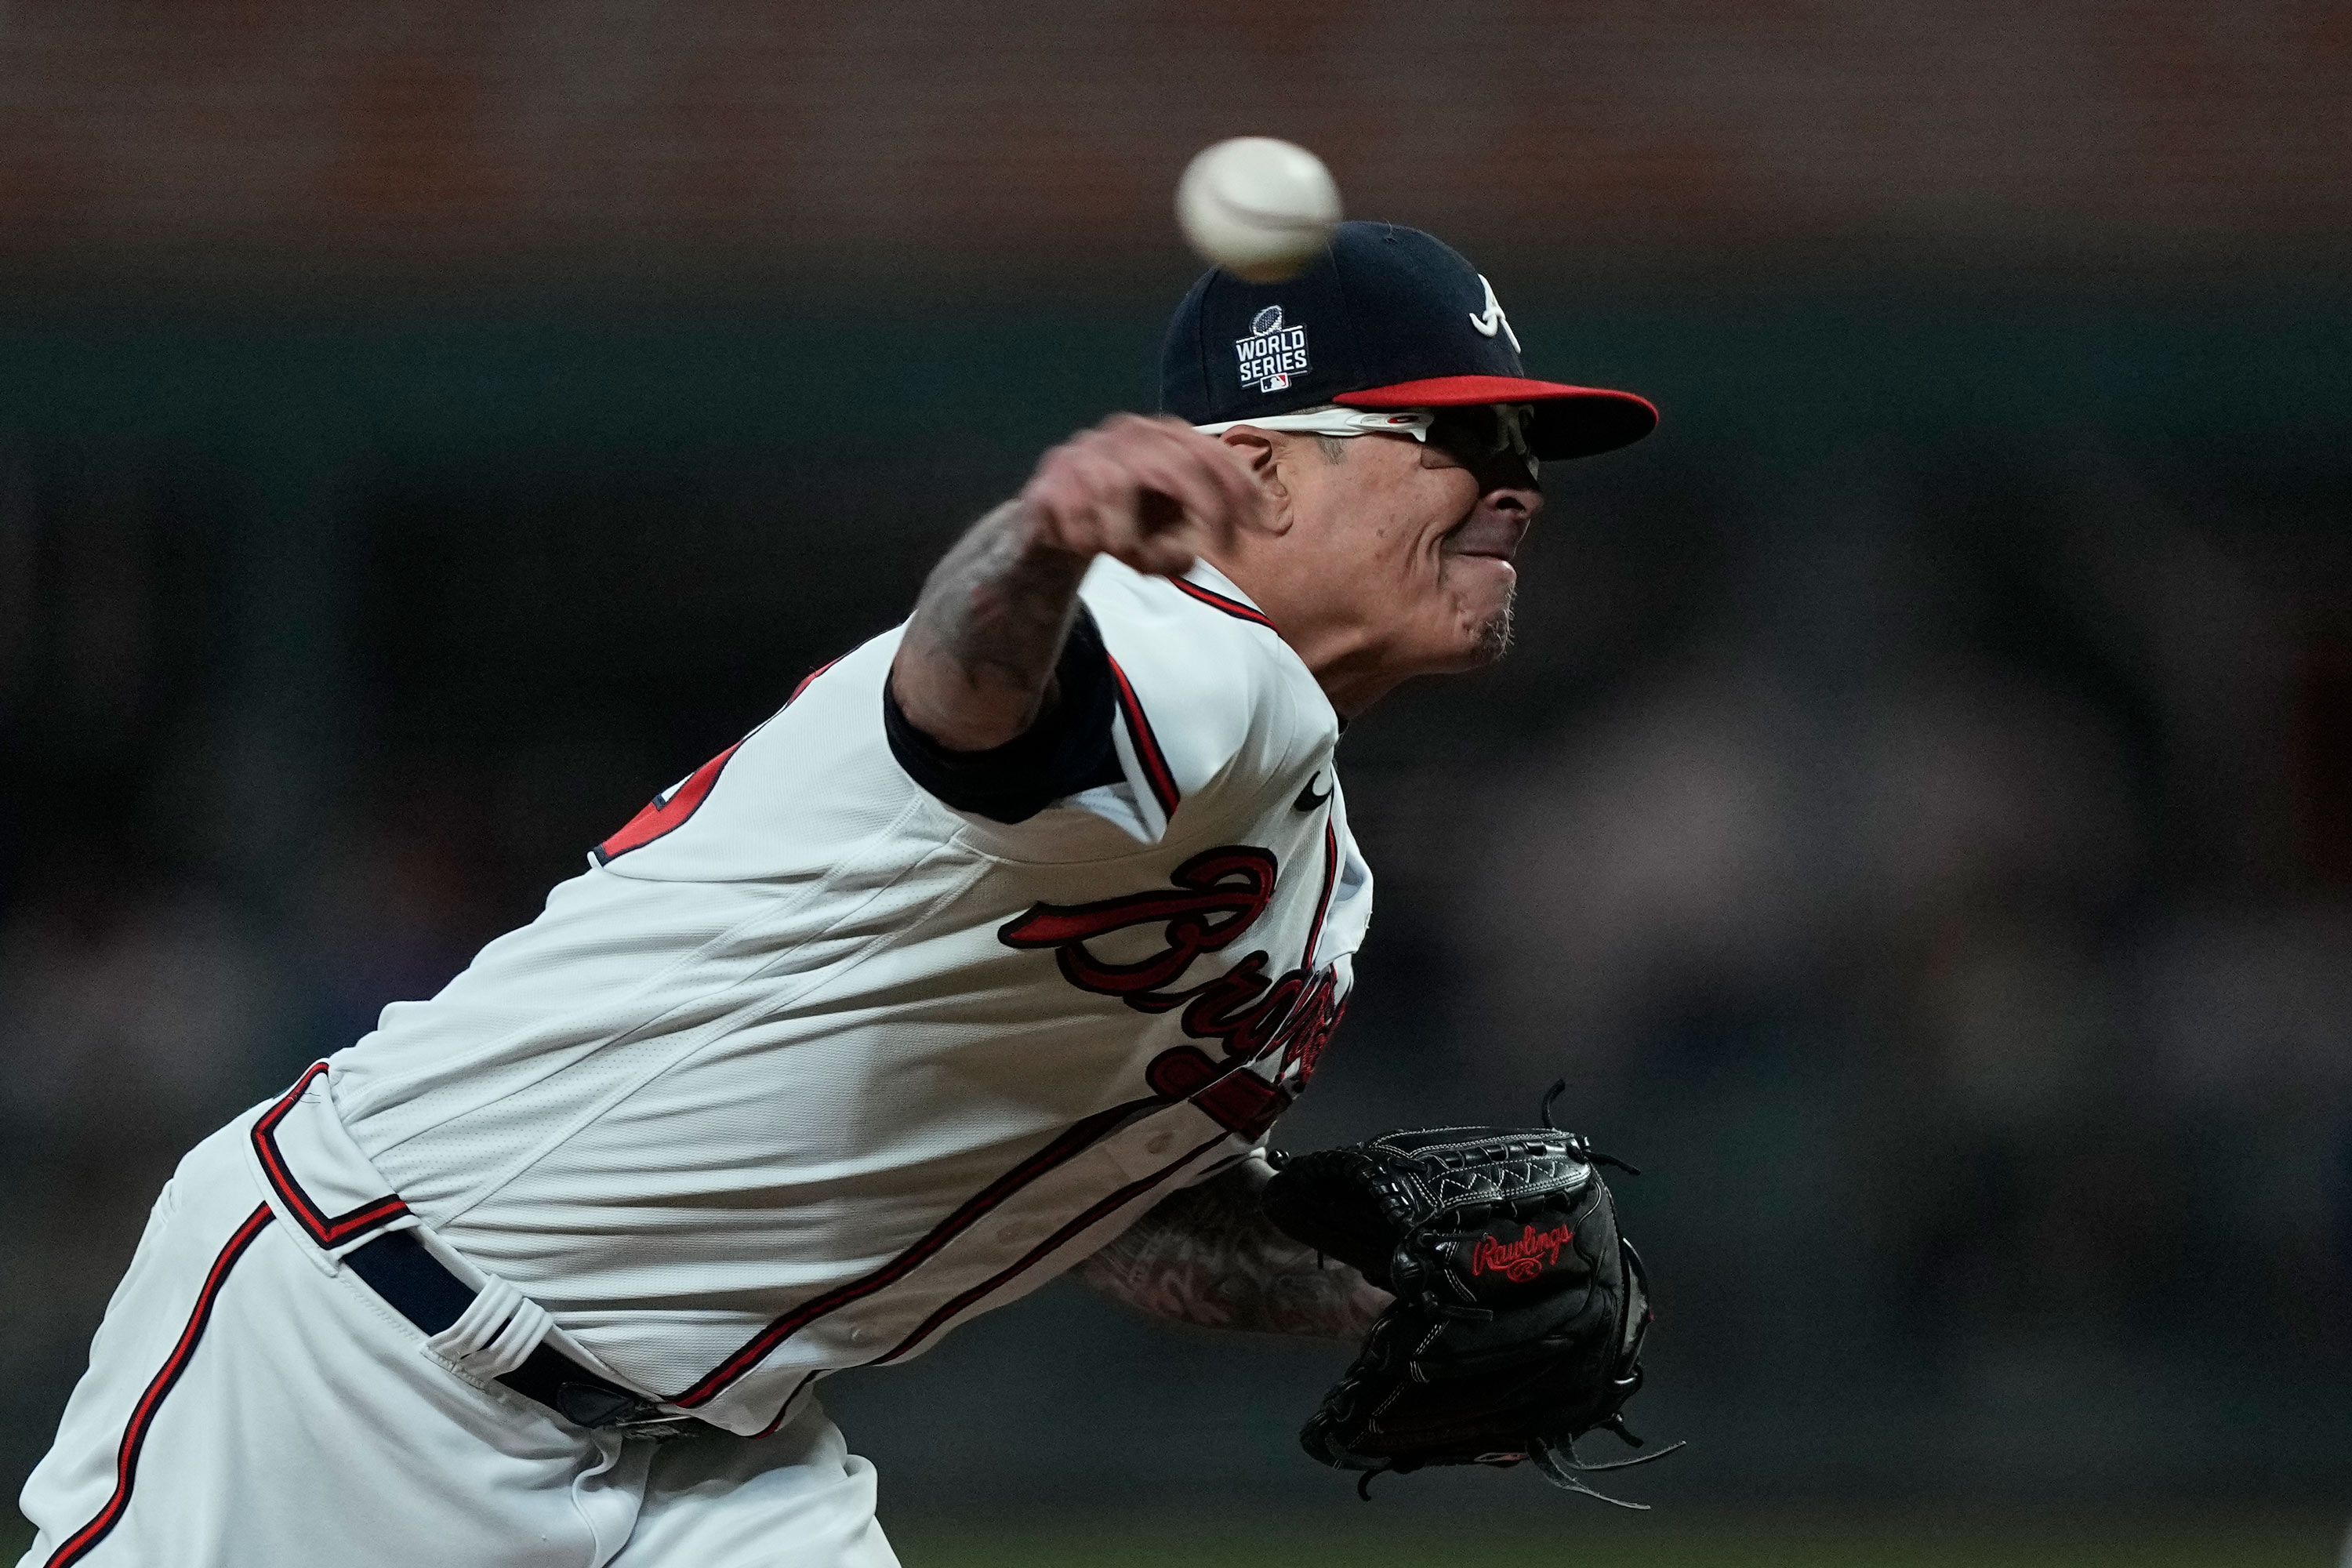 Braves pitcher Jesse Chavez throws during the third inning.